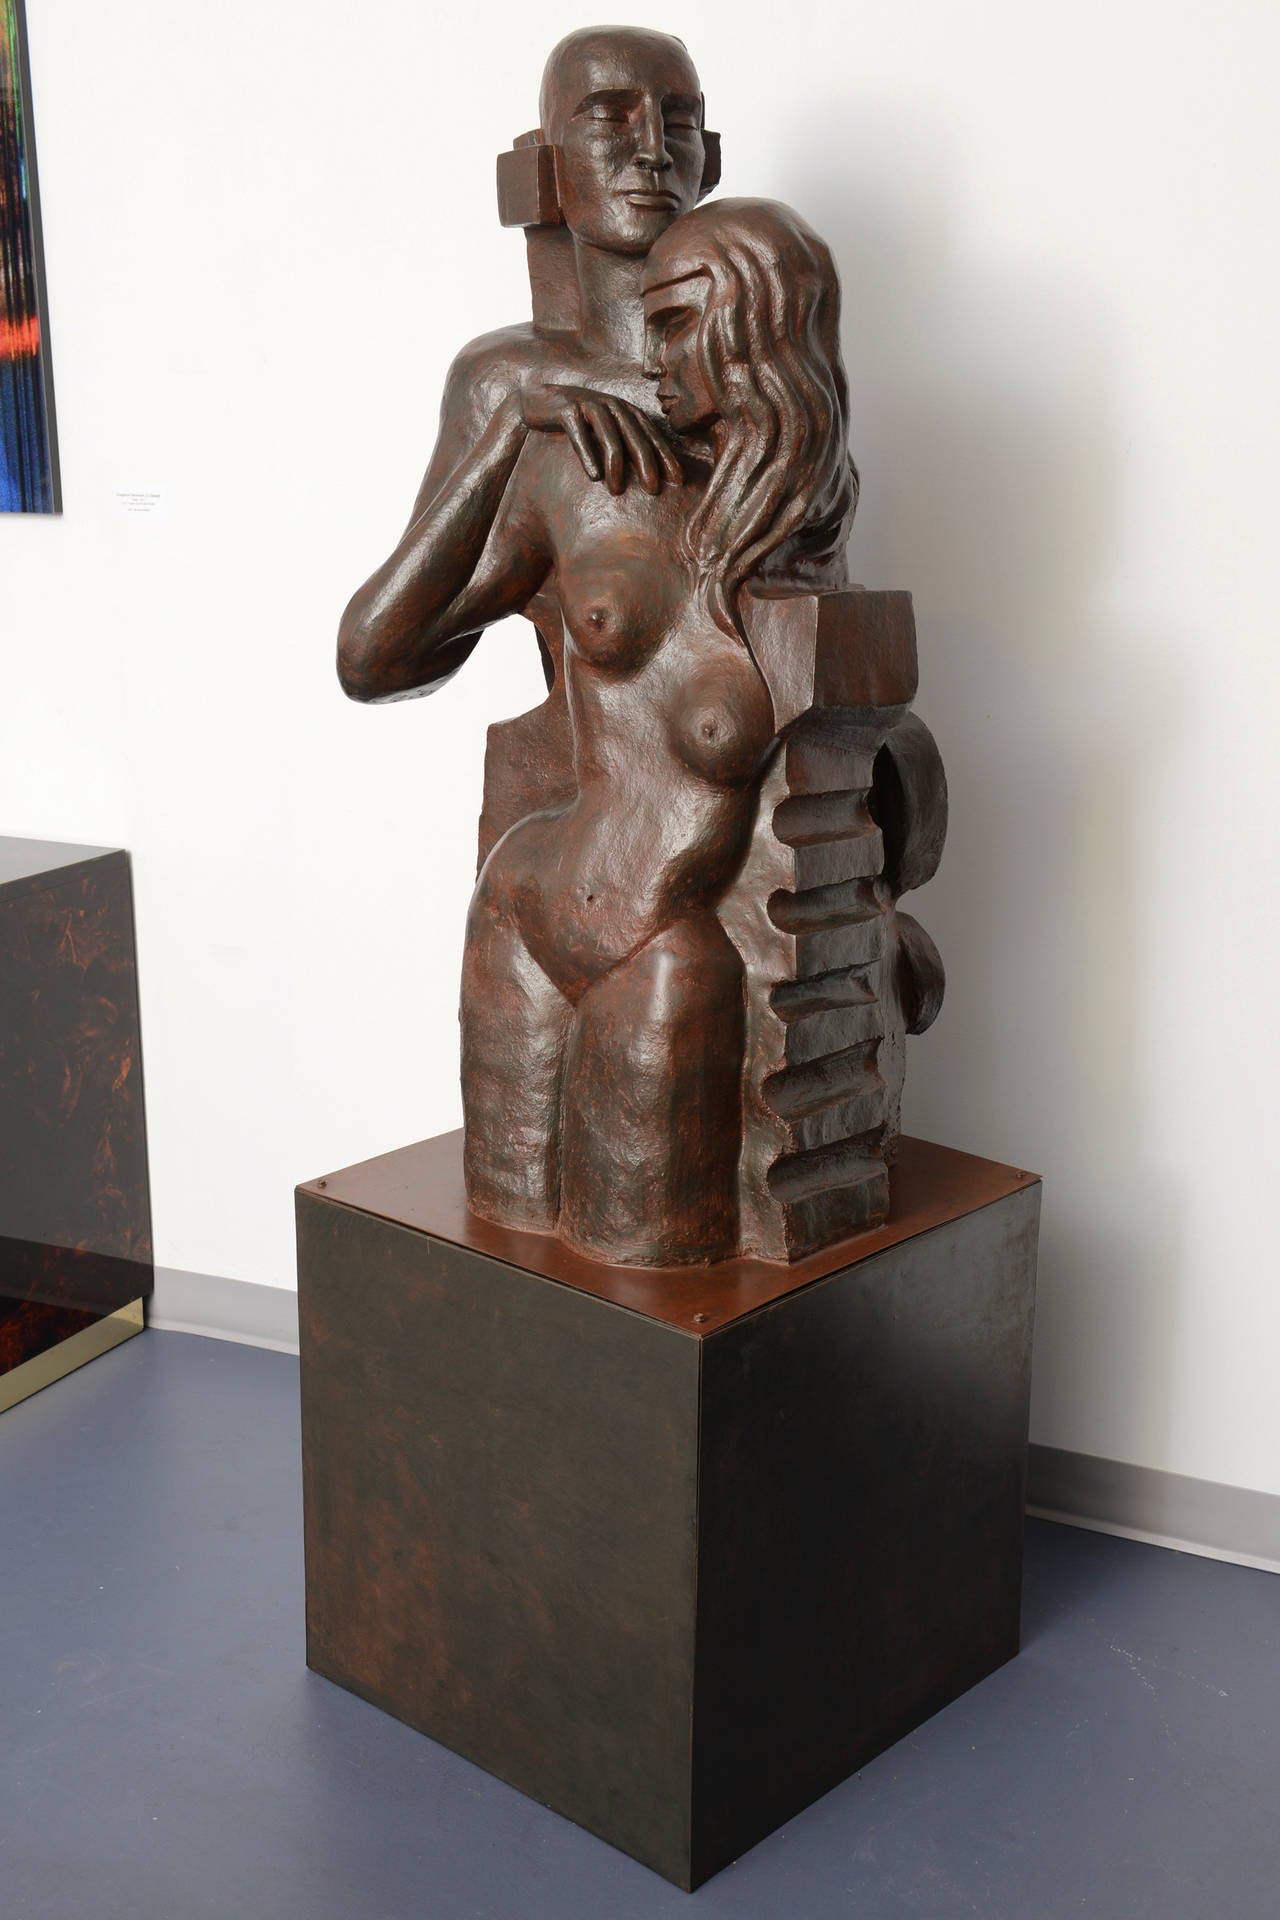 Man is the protection of women and children. The woman comes into its own strength, motherhood, procreation of humankind.
MARIKO Contemporary French Sculptor .
Merge the two characters through the arm which may belong to the man or woman according